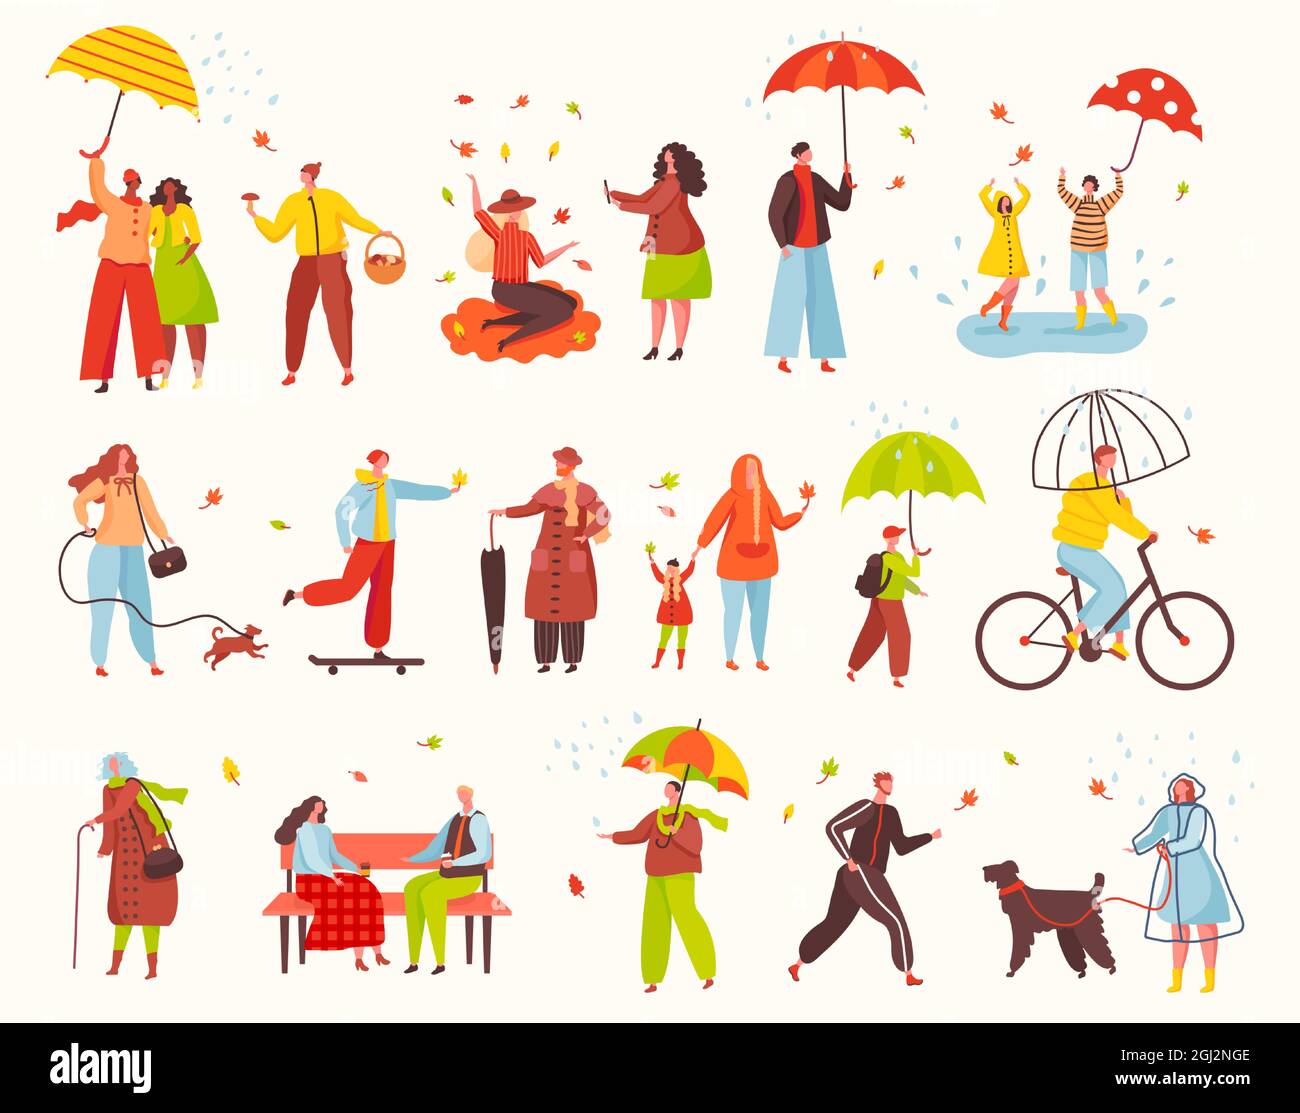 People walking with umbrellas under rain in autumn season park. Characters in warm clothes riding bike, walking dog. Fall activities vector set. Collecting mushrooms taking photos with leaves Stock Vector